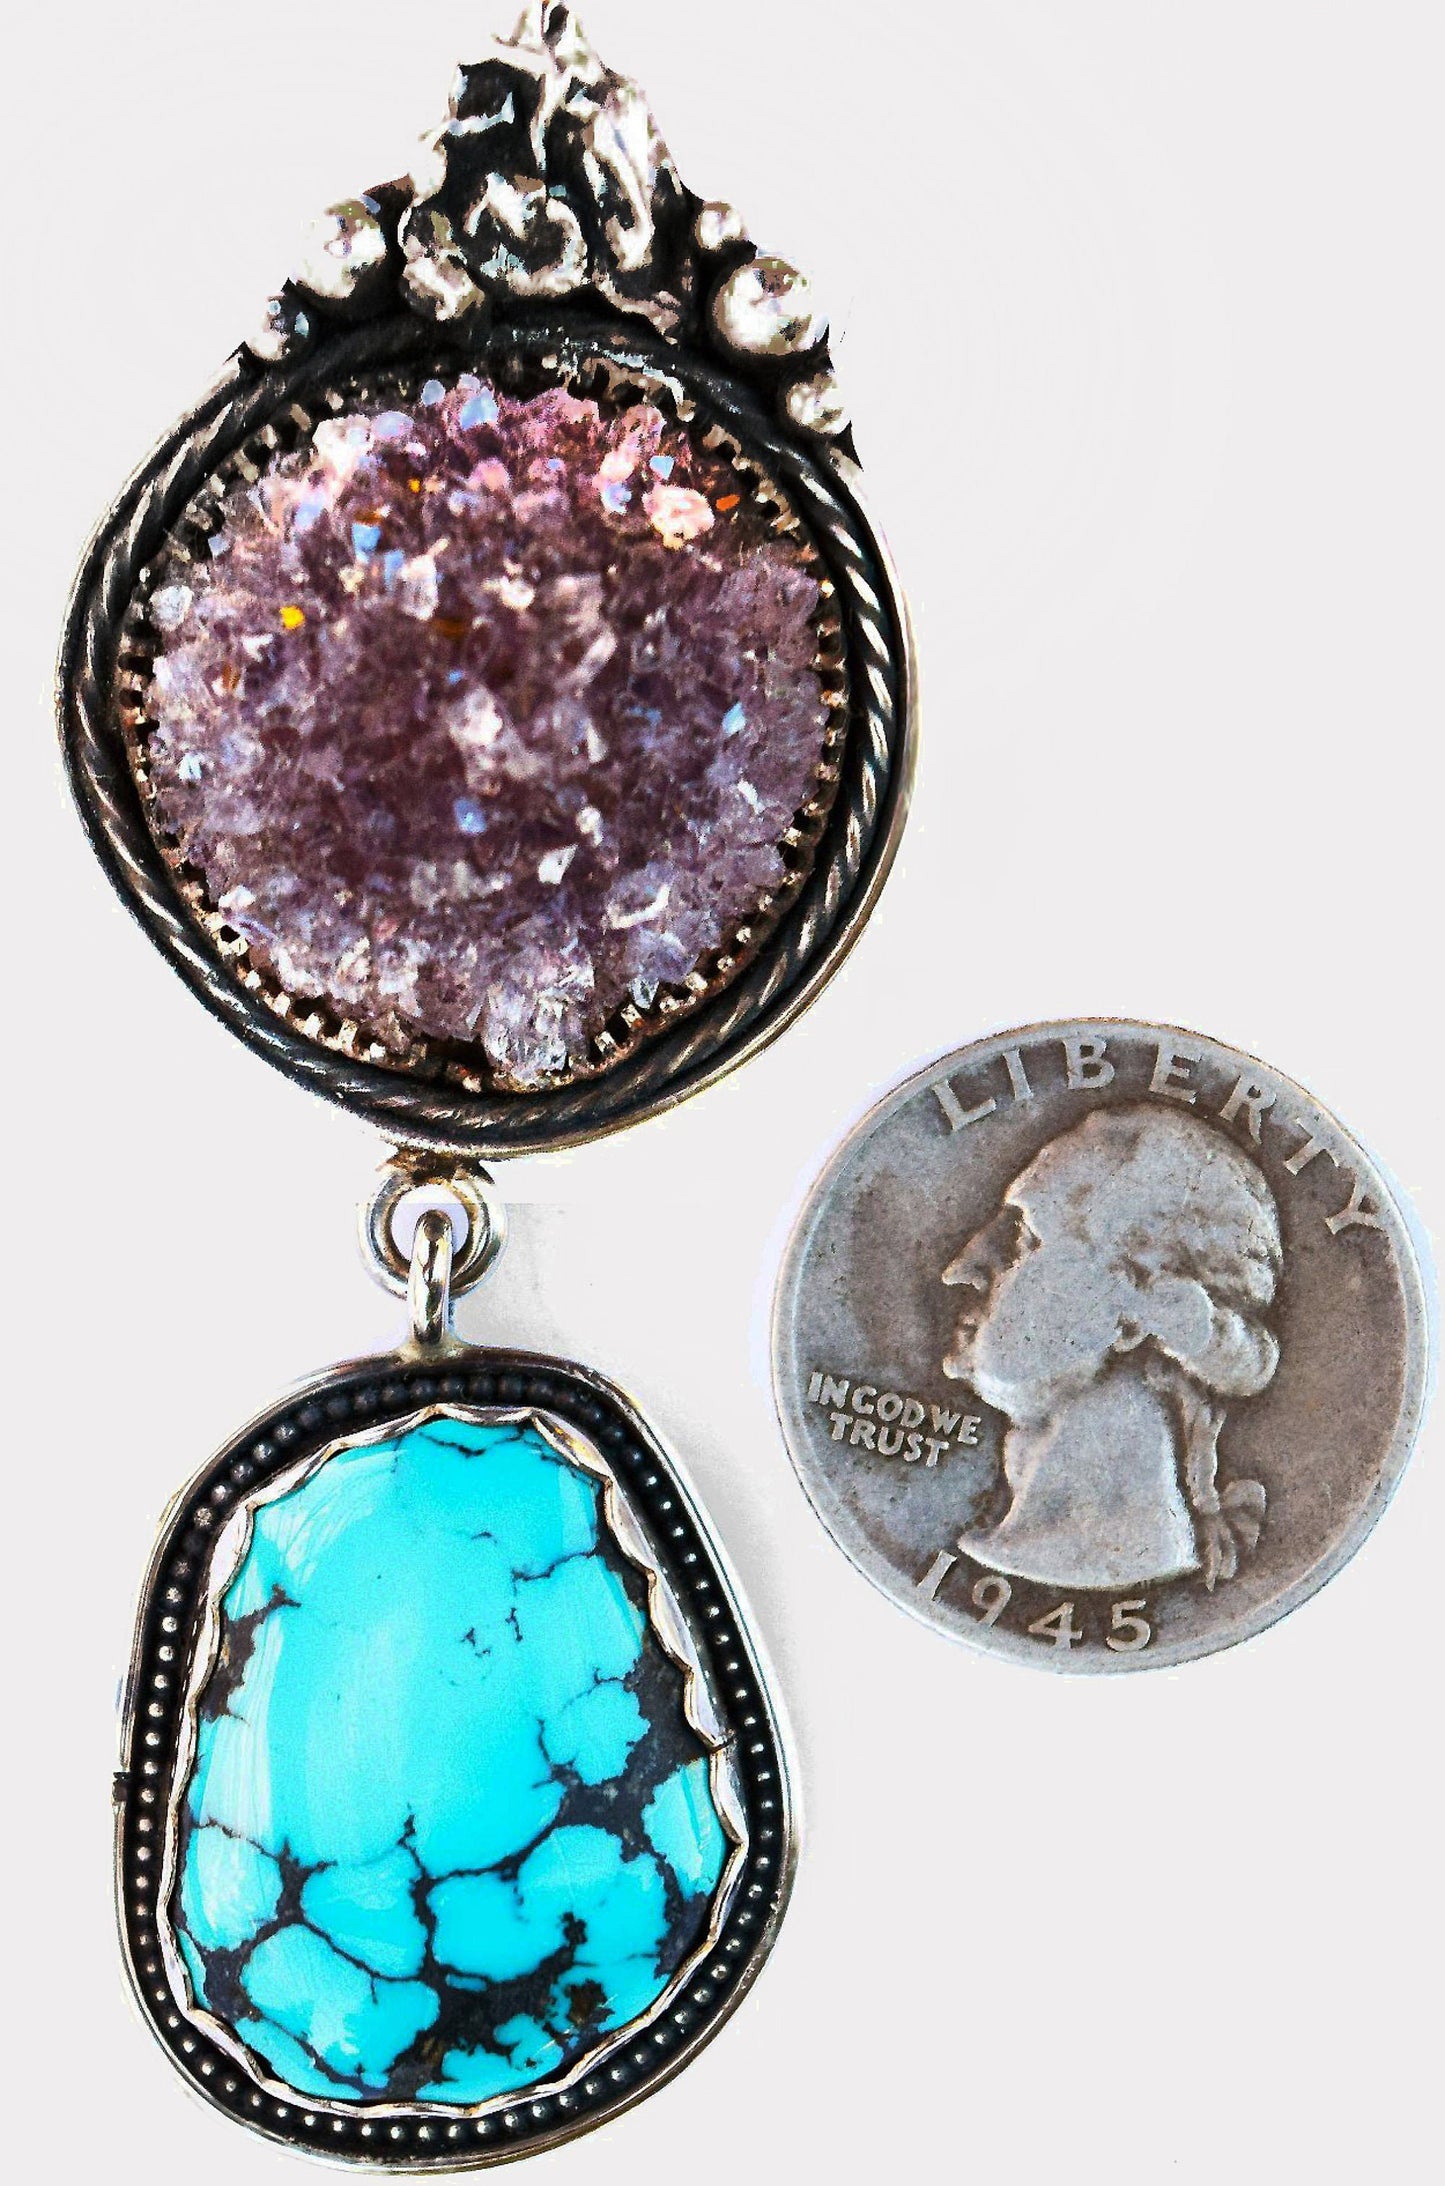 Tiny Amethyst crystals with high grade Turquoise in a hand made pendant.